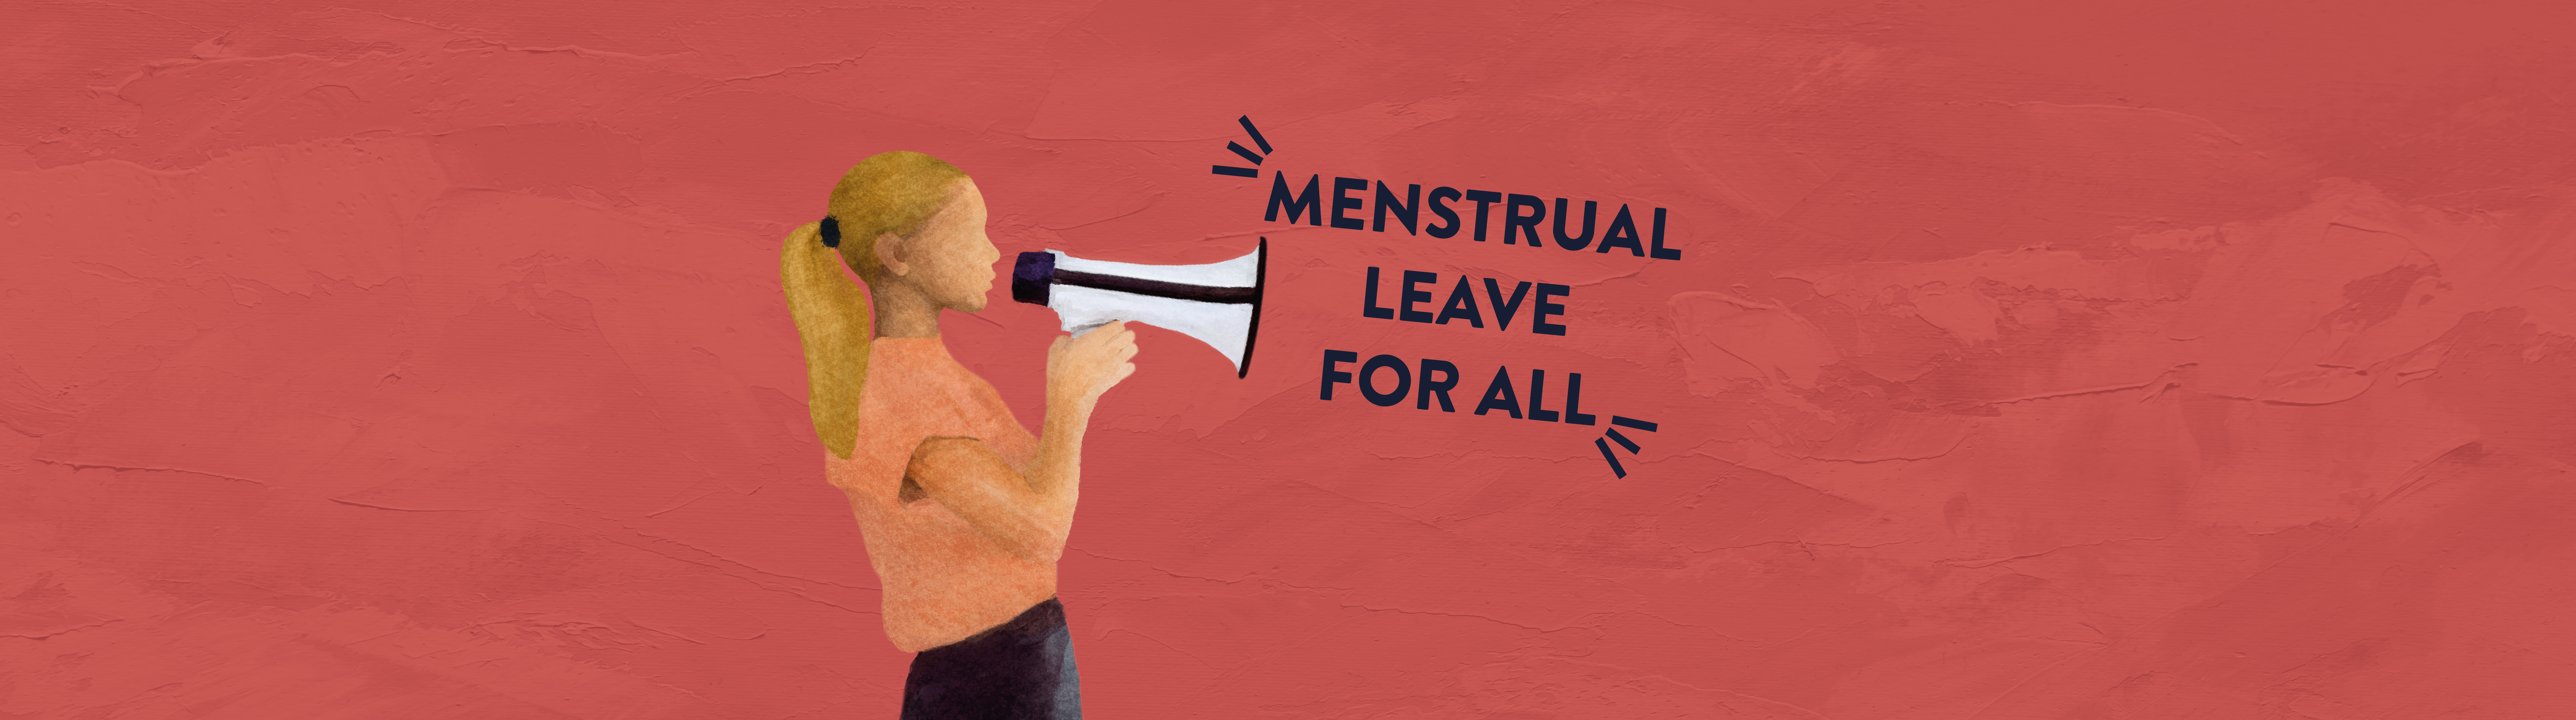 We want menstrual leave for all!